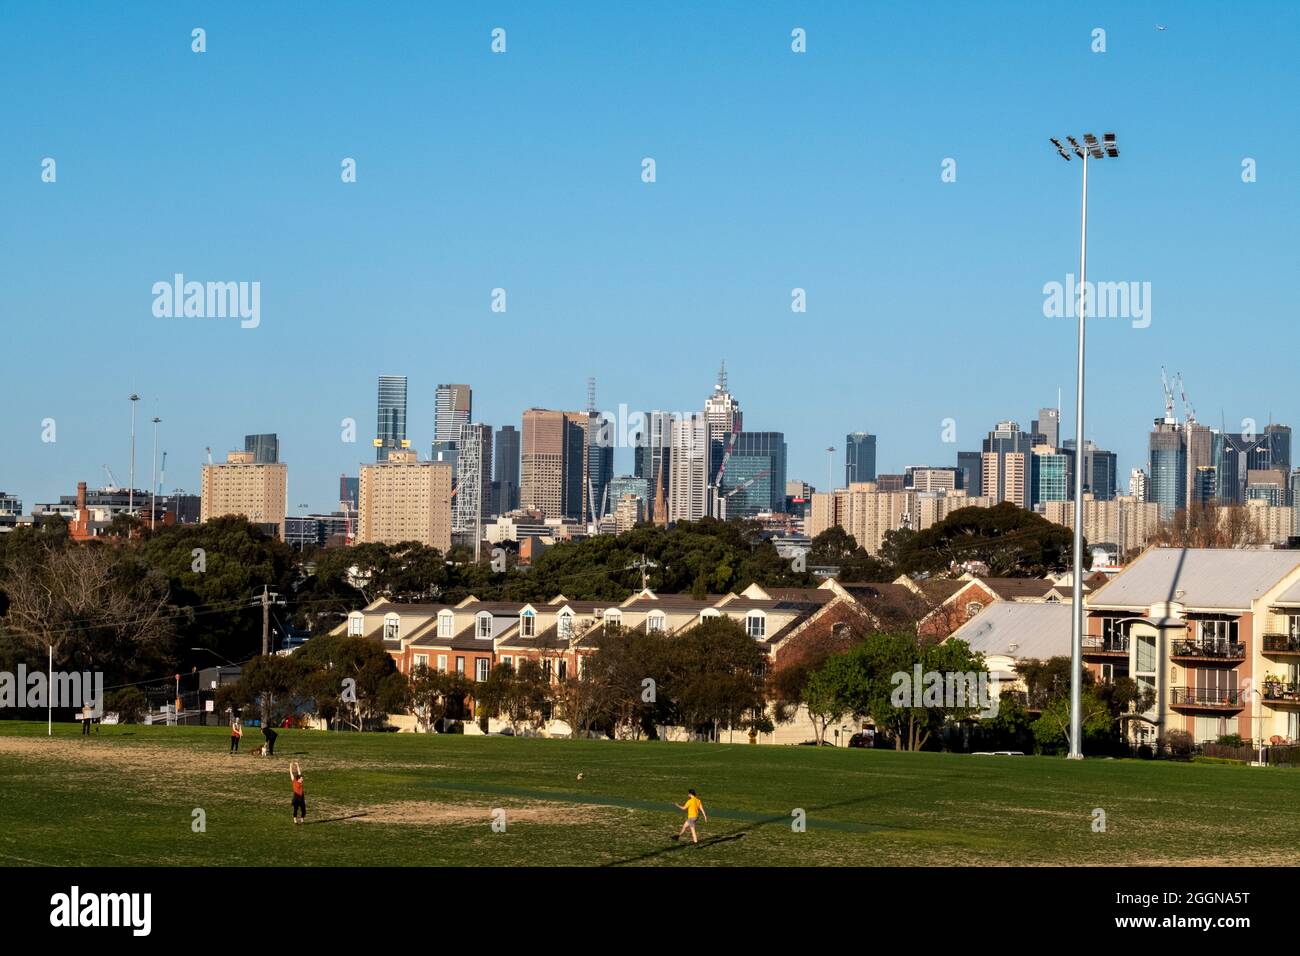 People exercising at the ramsden street oval in front of the city skyline. Melbourne Victoria, Australia Stock Photo